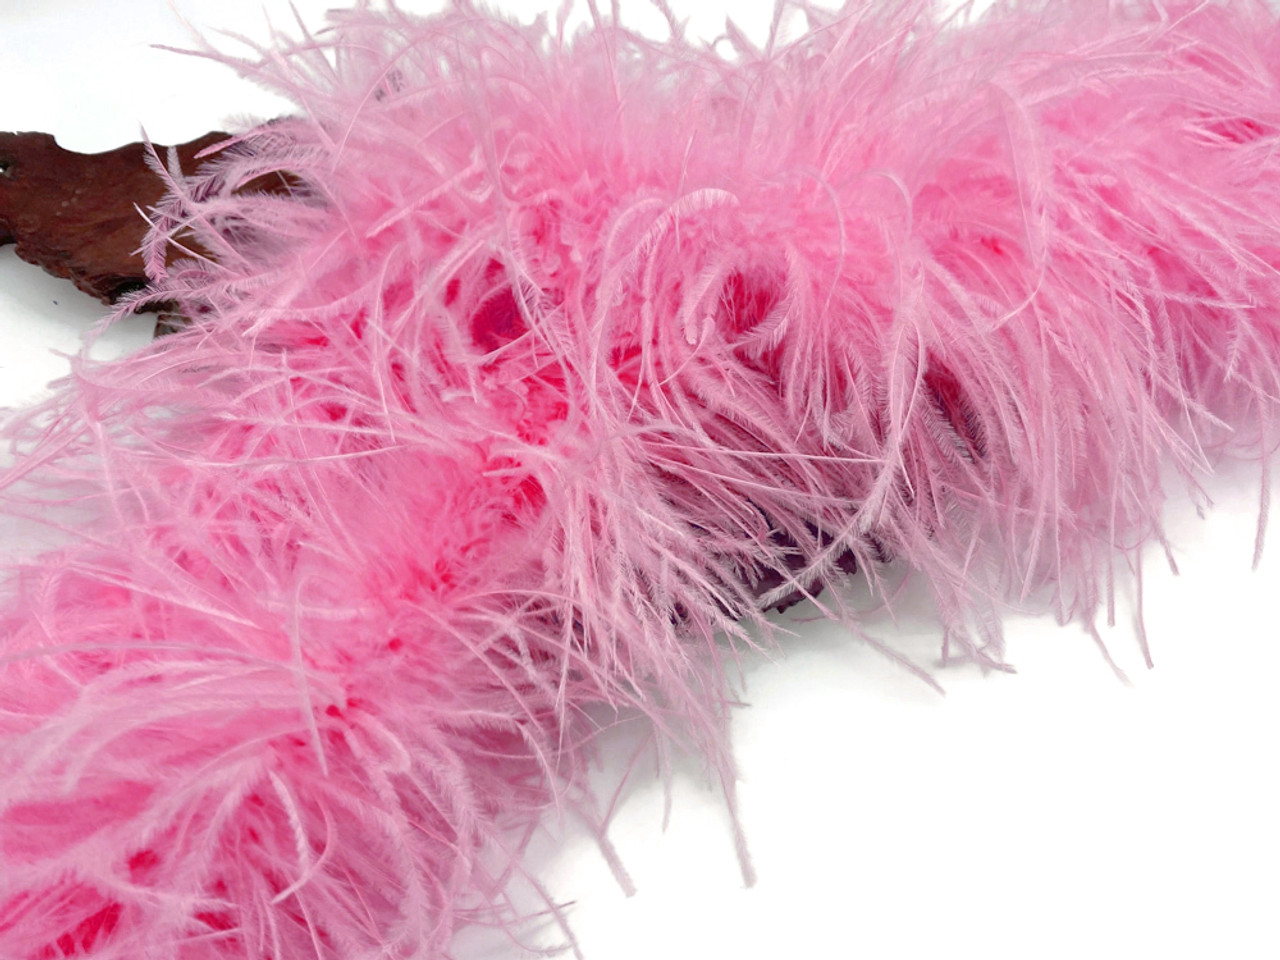 20 ply full and fluffy Luxury Ostrich Feather Boa